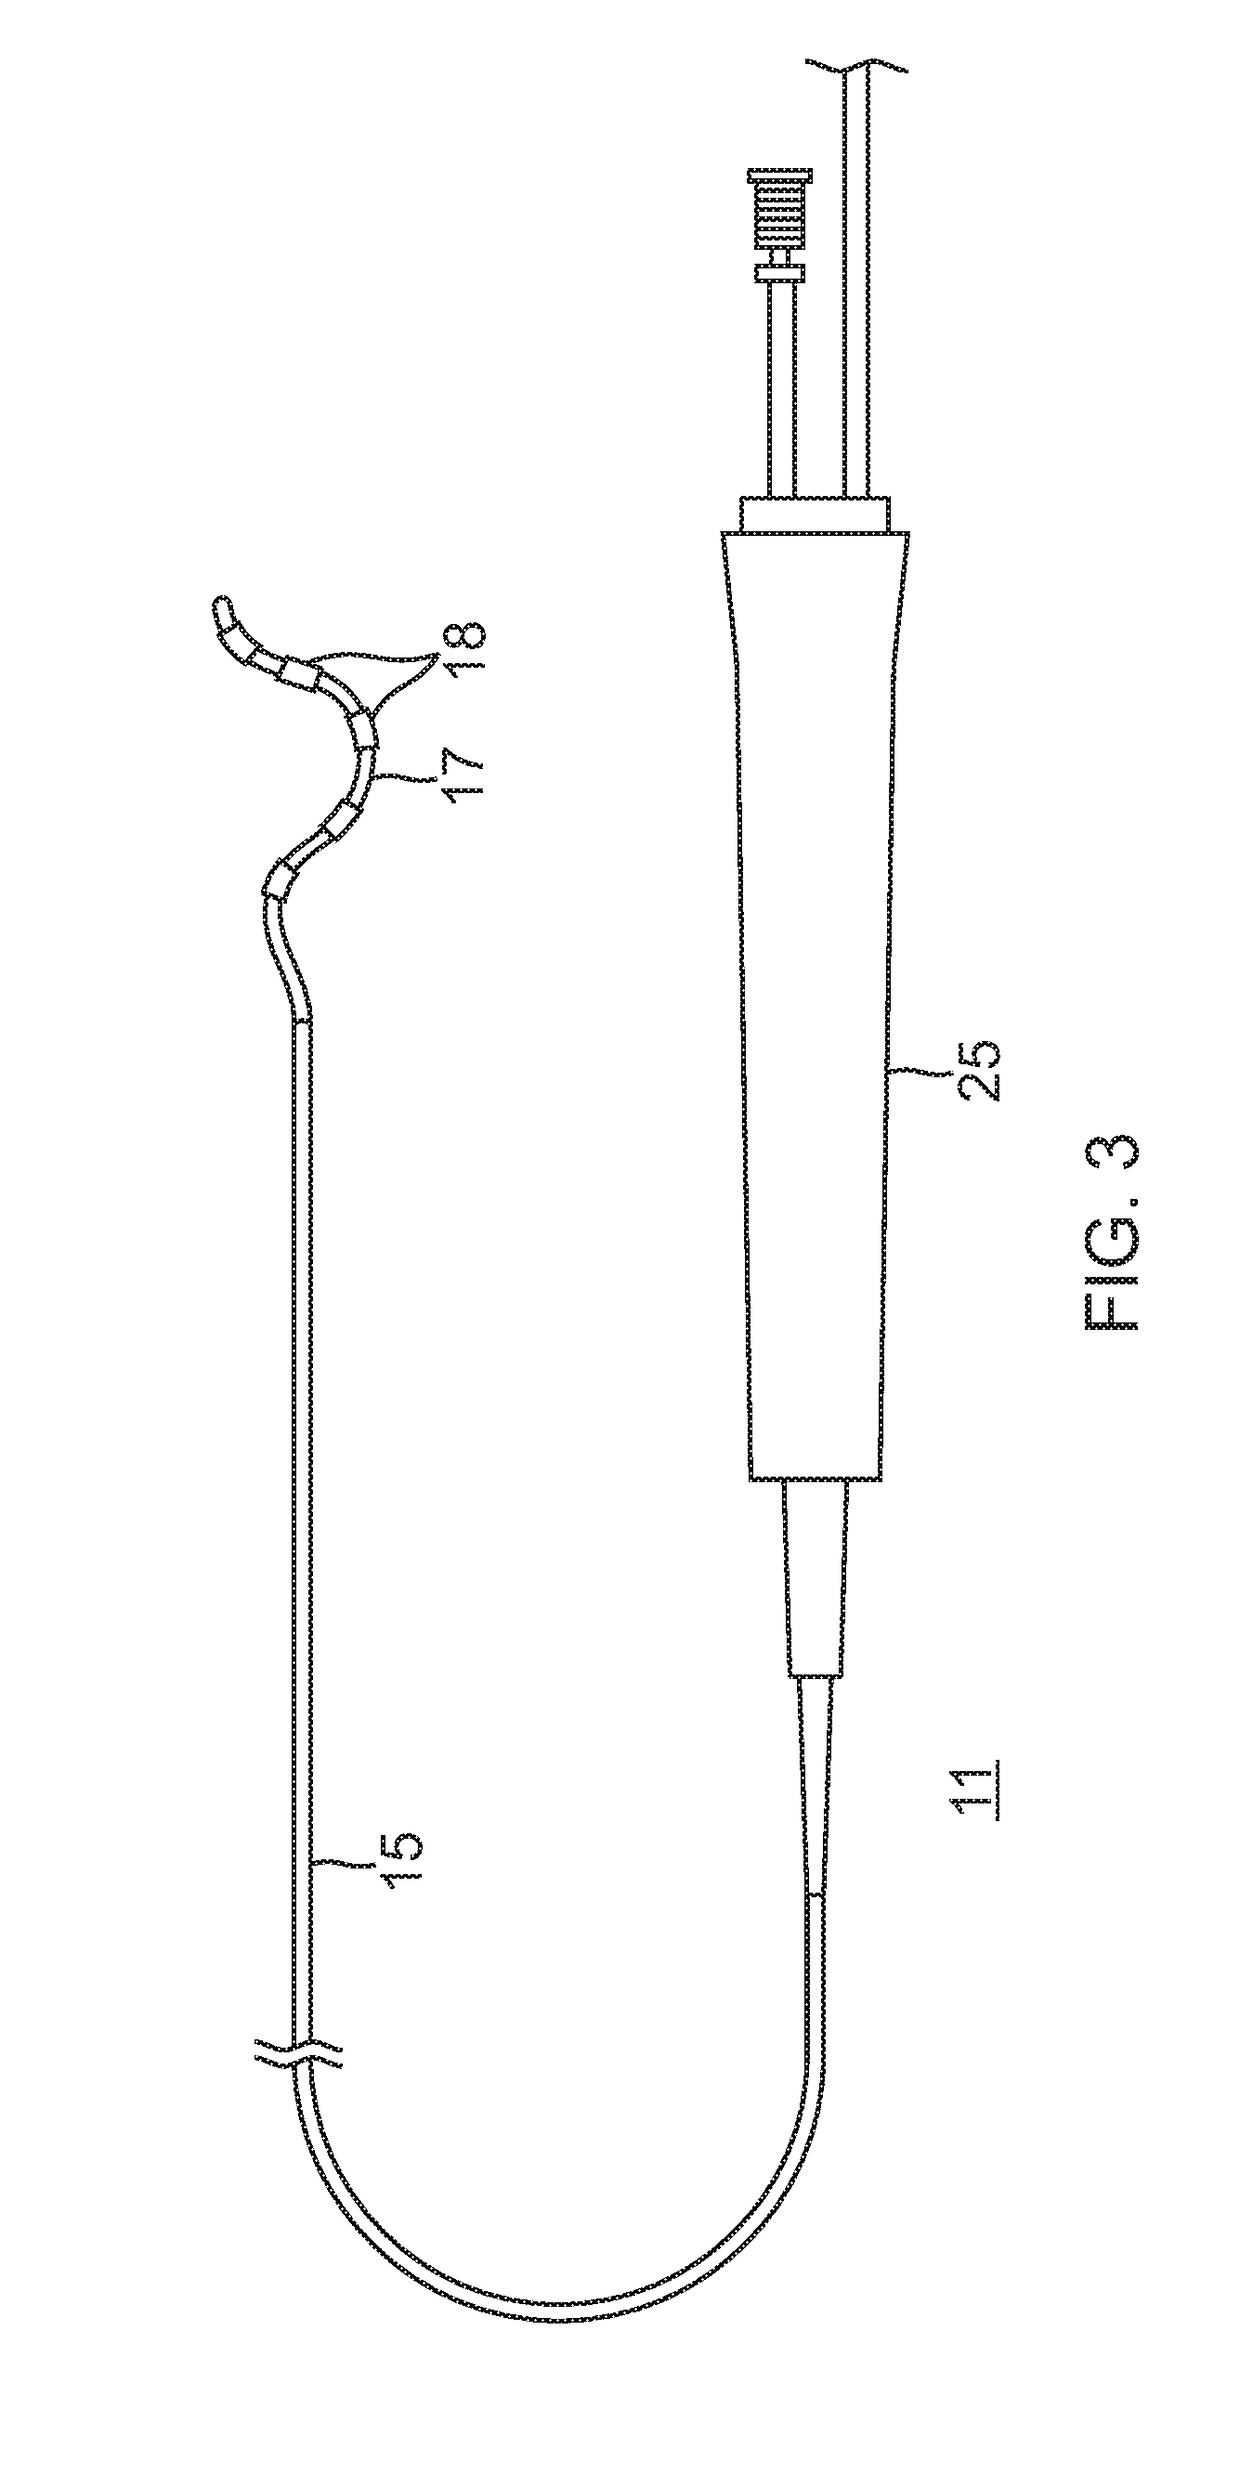 Renal ablation and visualization system and method with composite anatomical display image